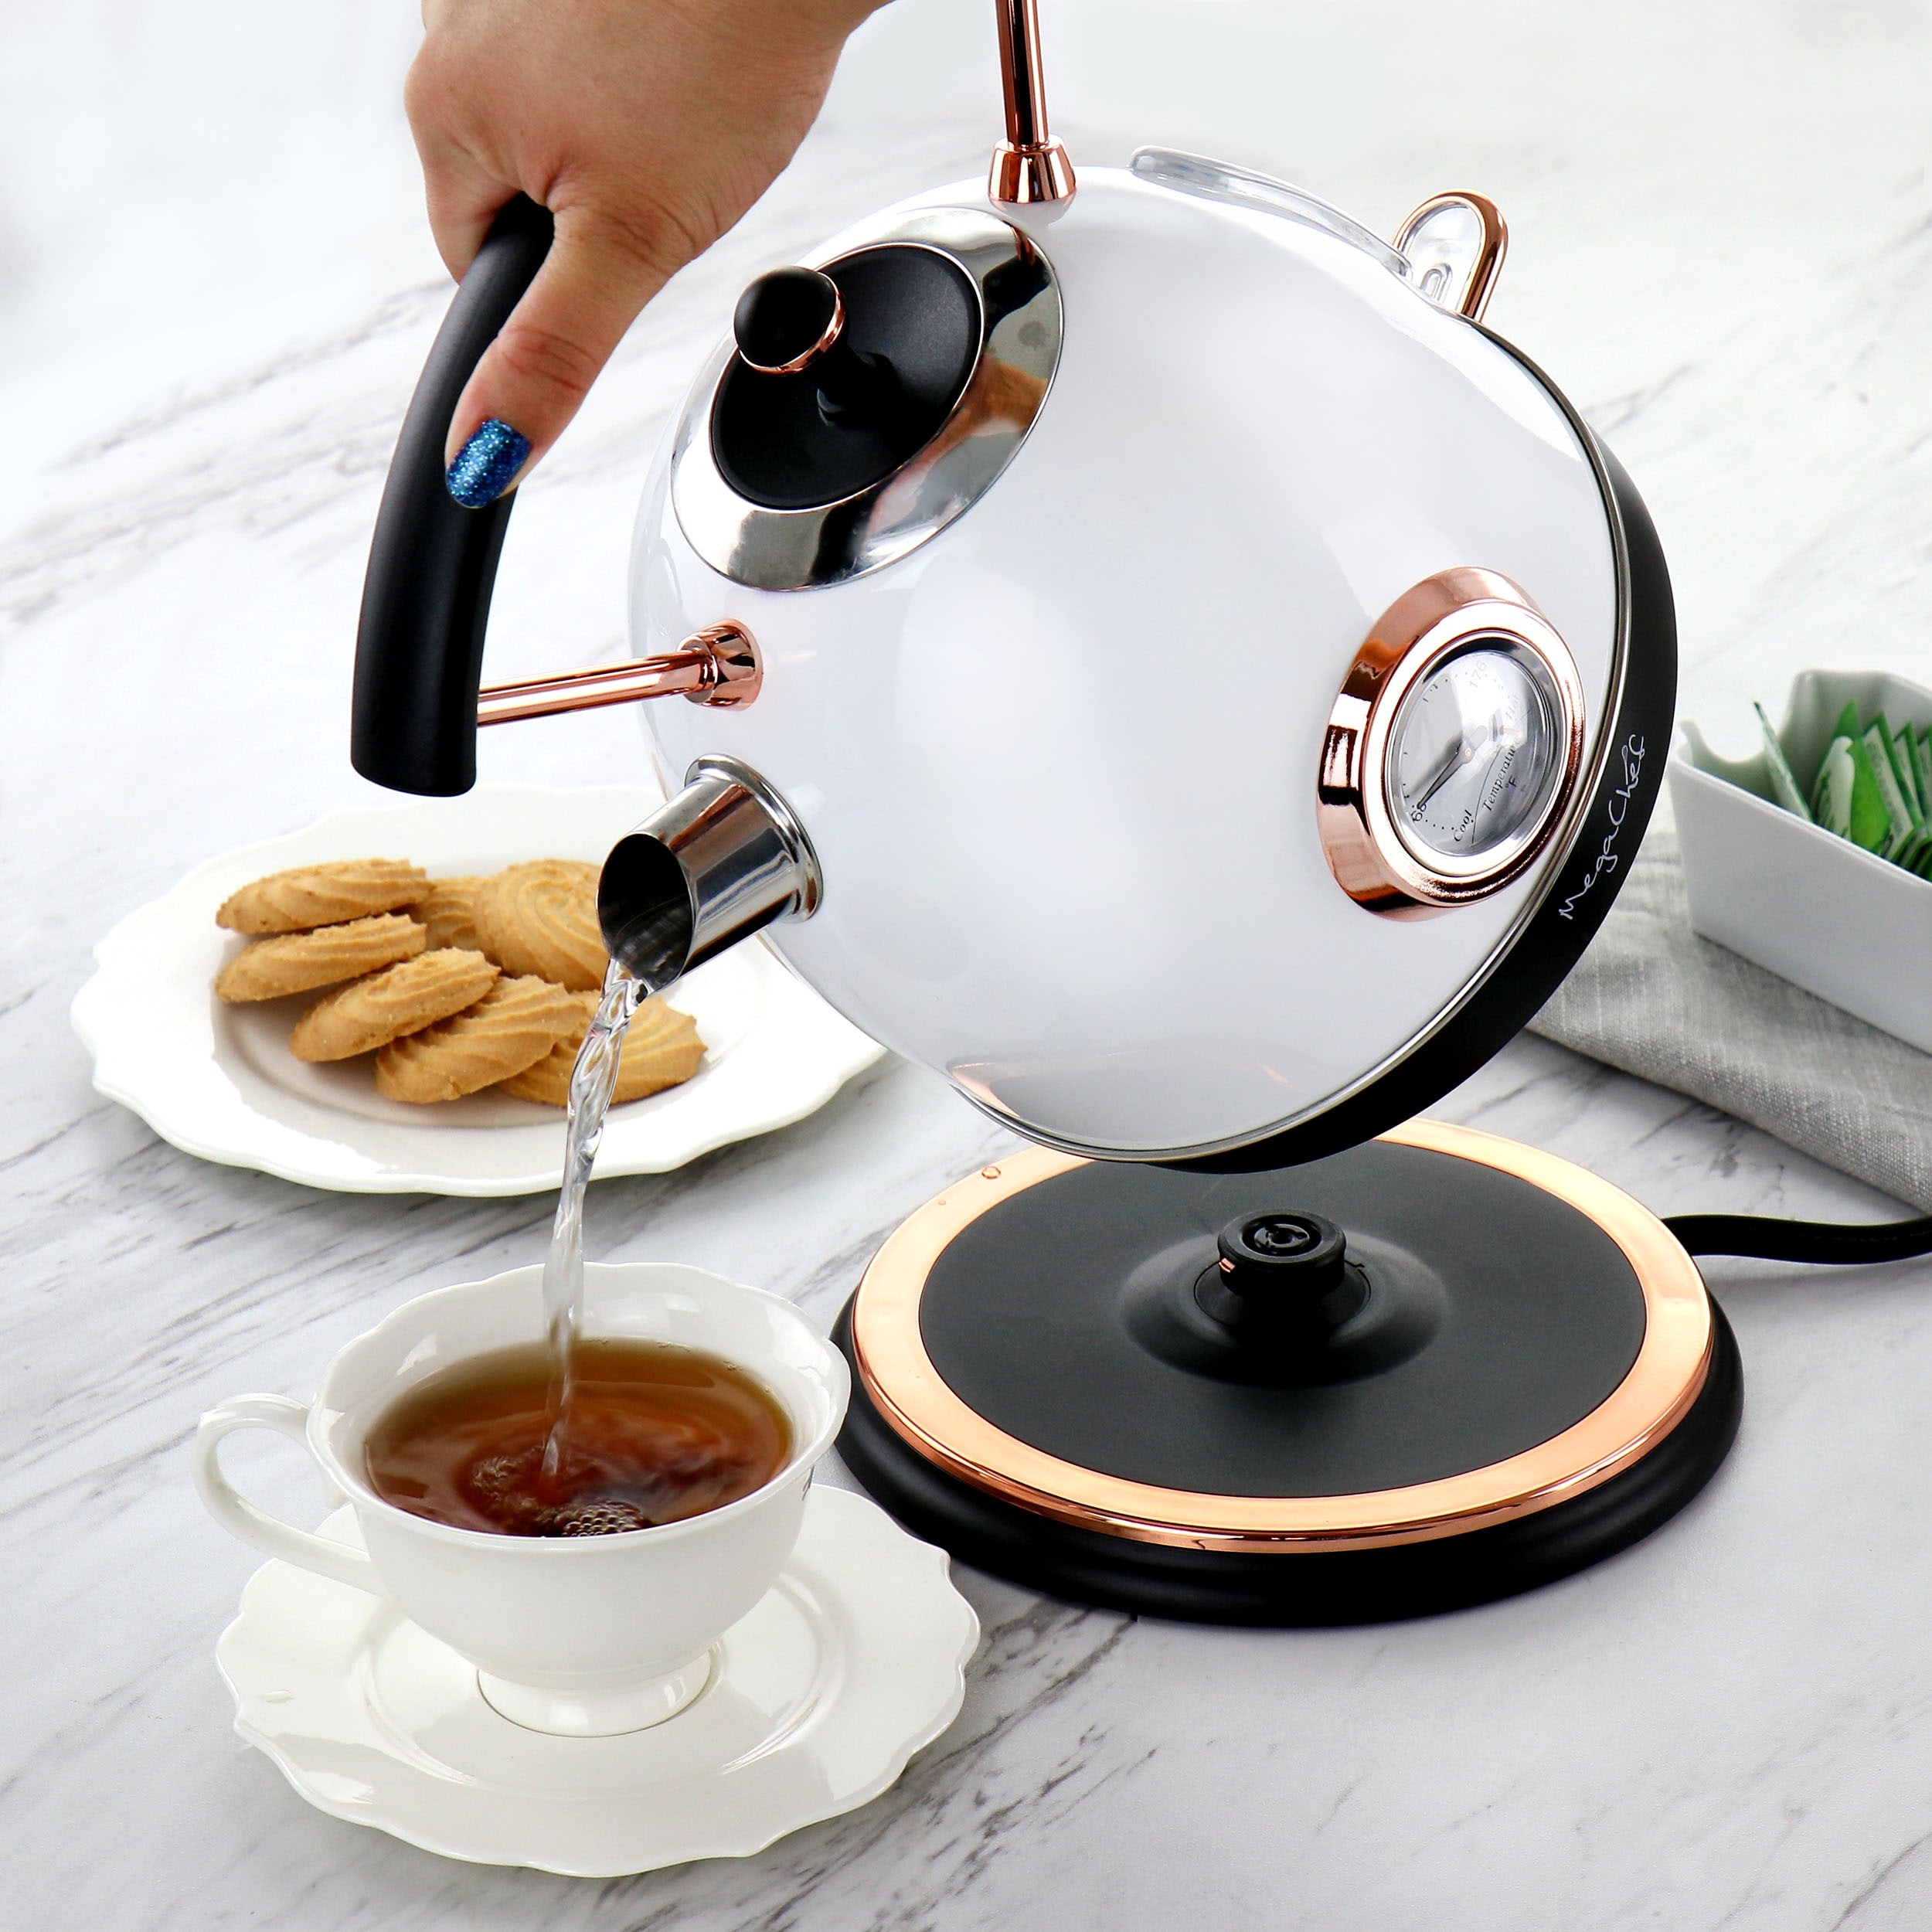 https://ak1.ostkcdn.com/images/products/is/images/direct/034ace3f94d41ac9490b52f3446c6da51b35e3a0/MegaChef-1.8L-Half-Circle-Electric-Tea-Kettle-with-Thermostat-in-White.jpg